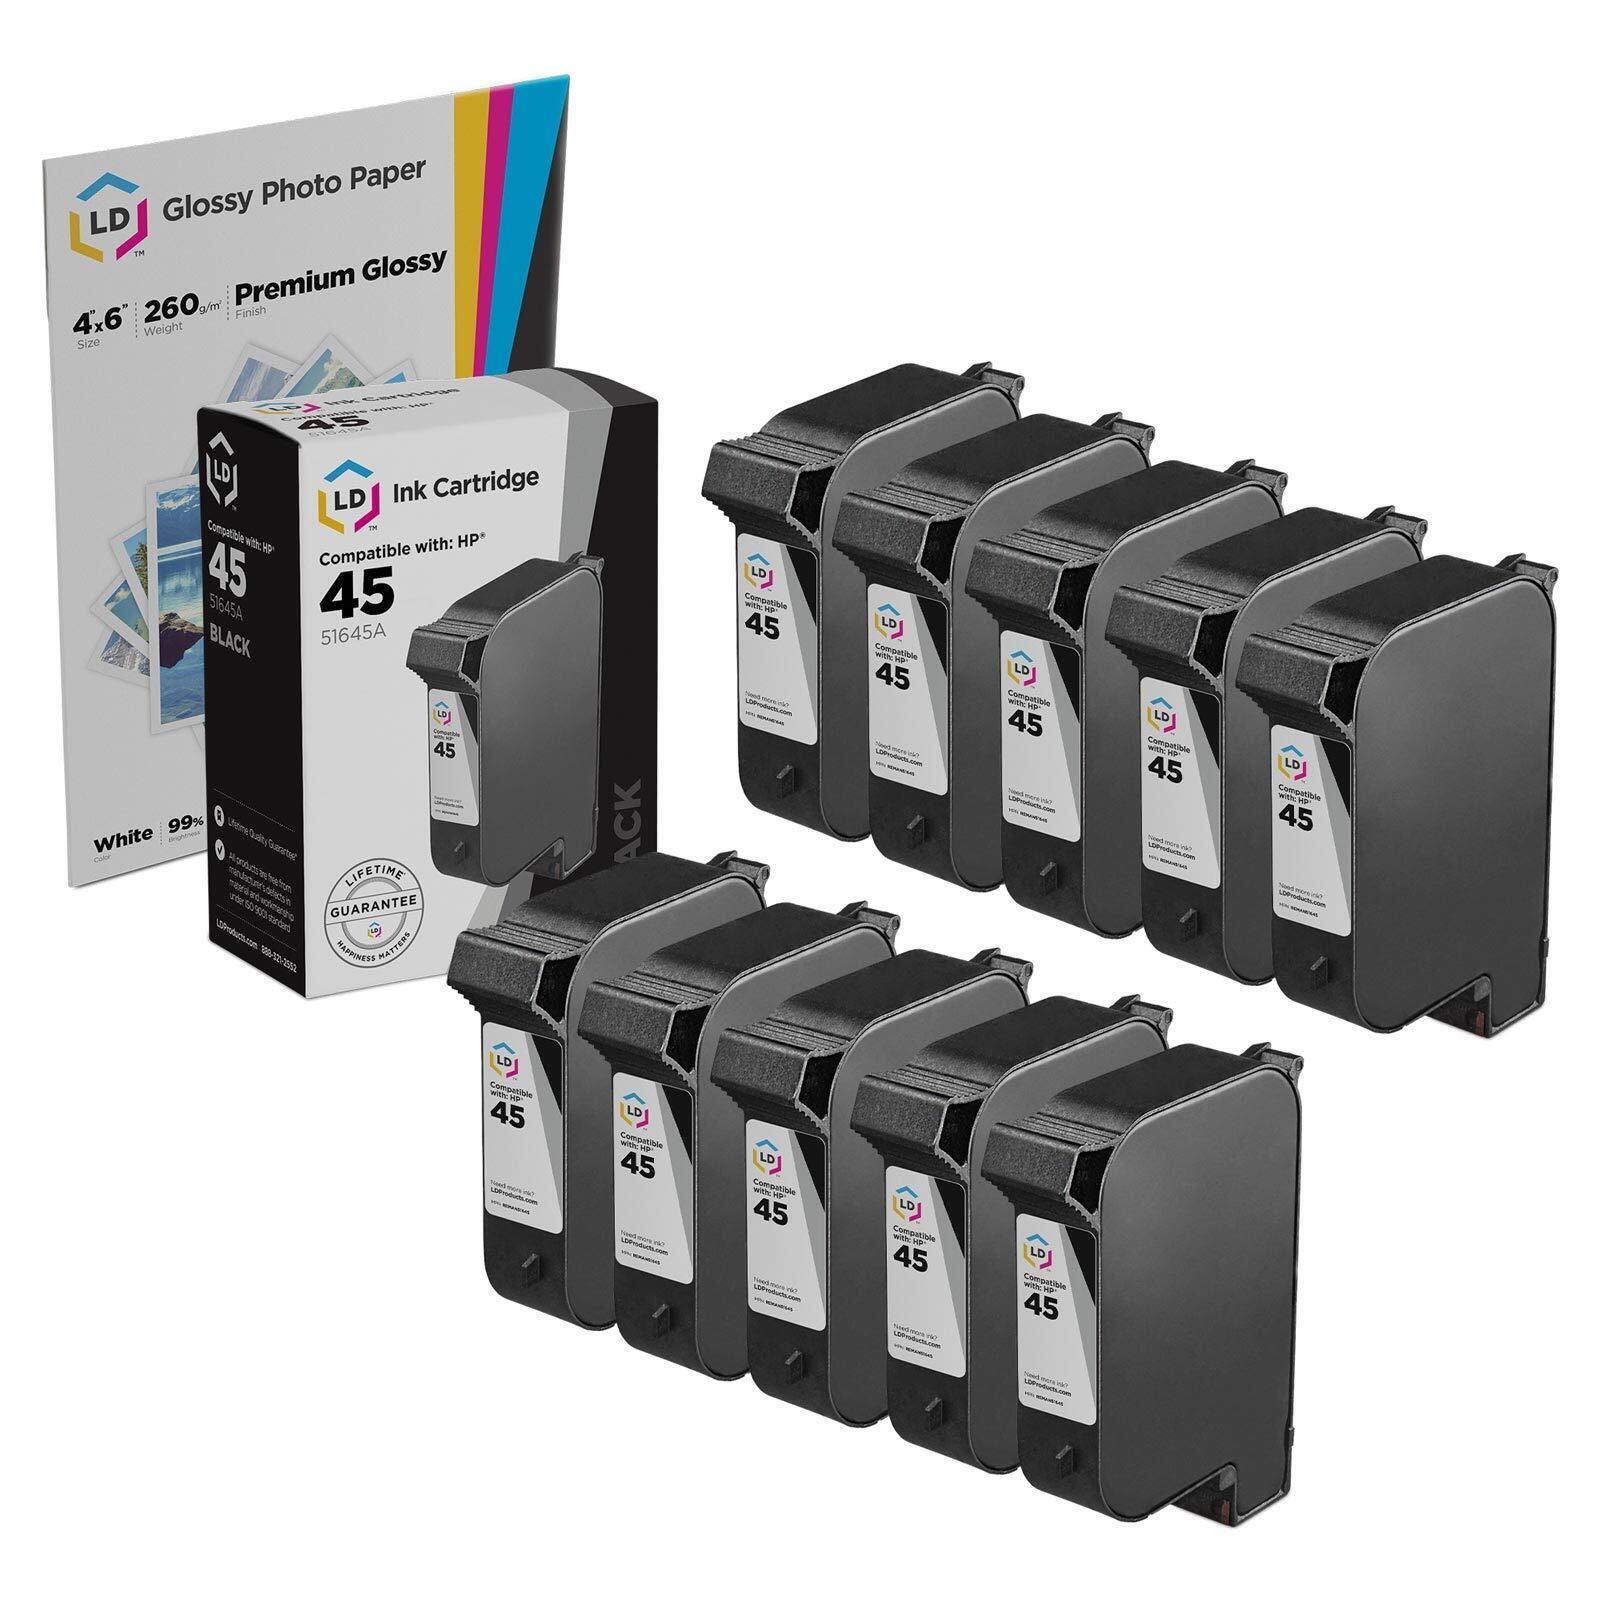 LD Products Replacement for HP 45 / 51645A Black Ink Cartridges 10-Pack